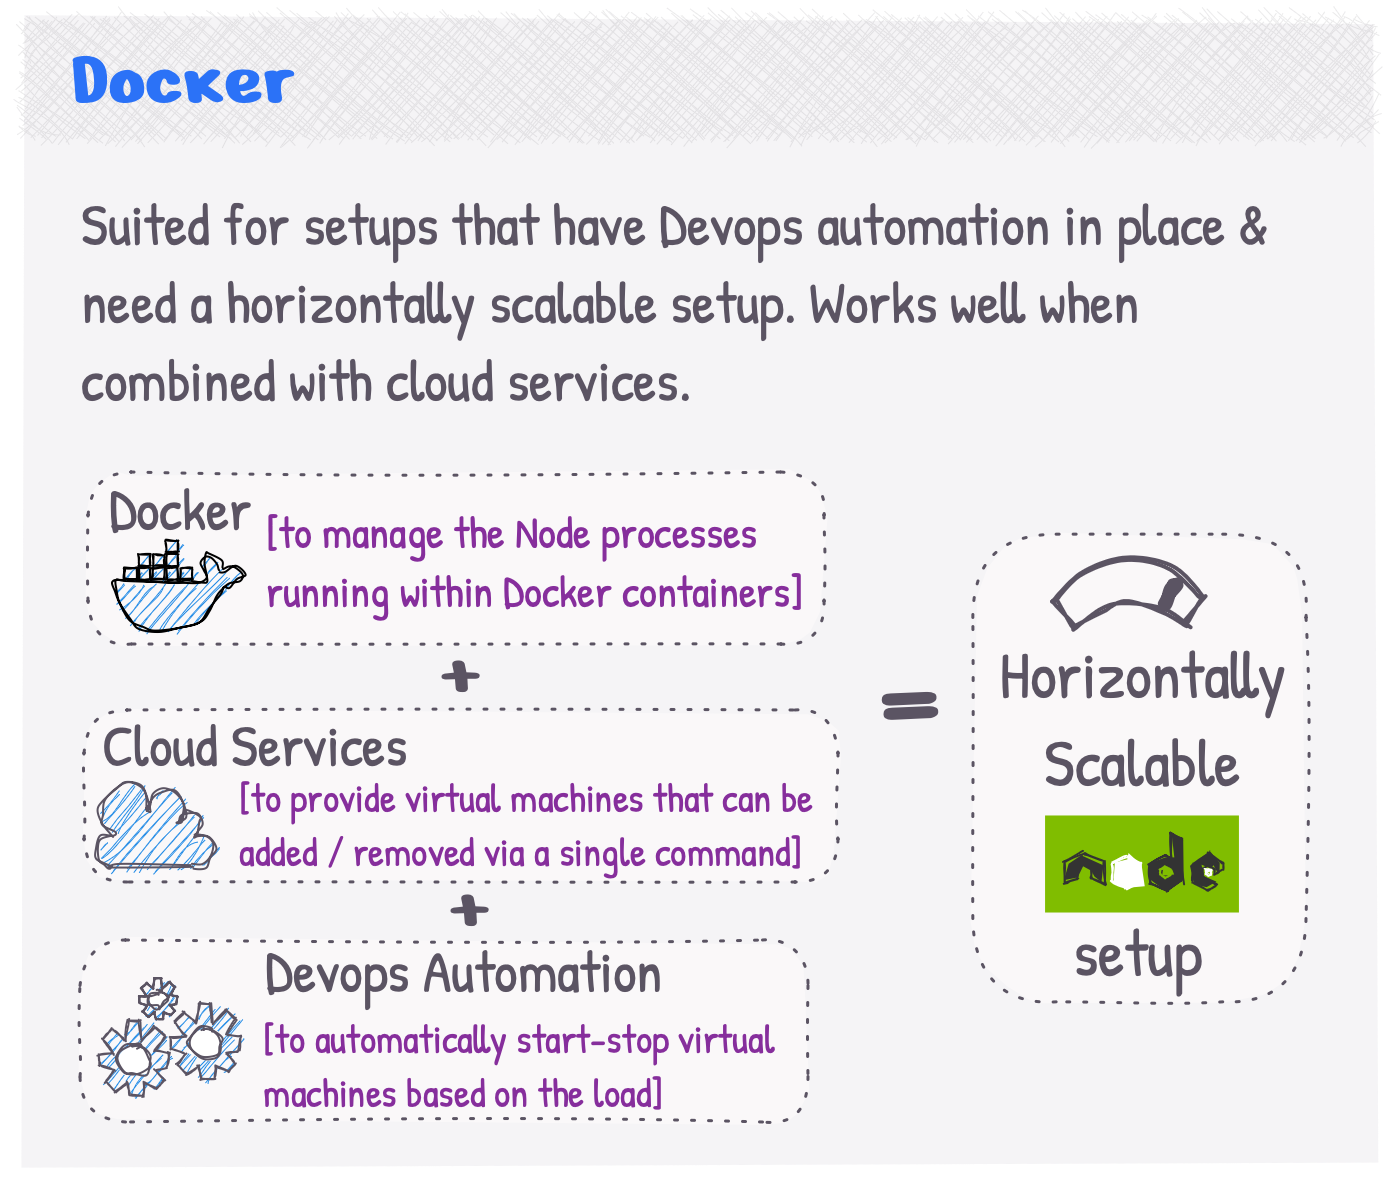 Docker with devops automation on the cloud